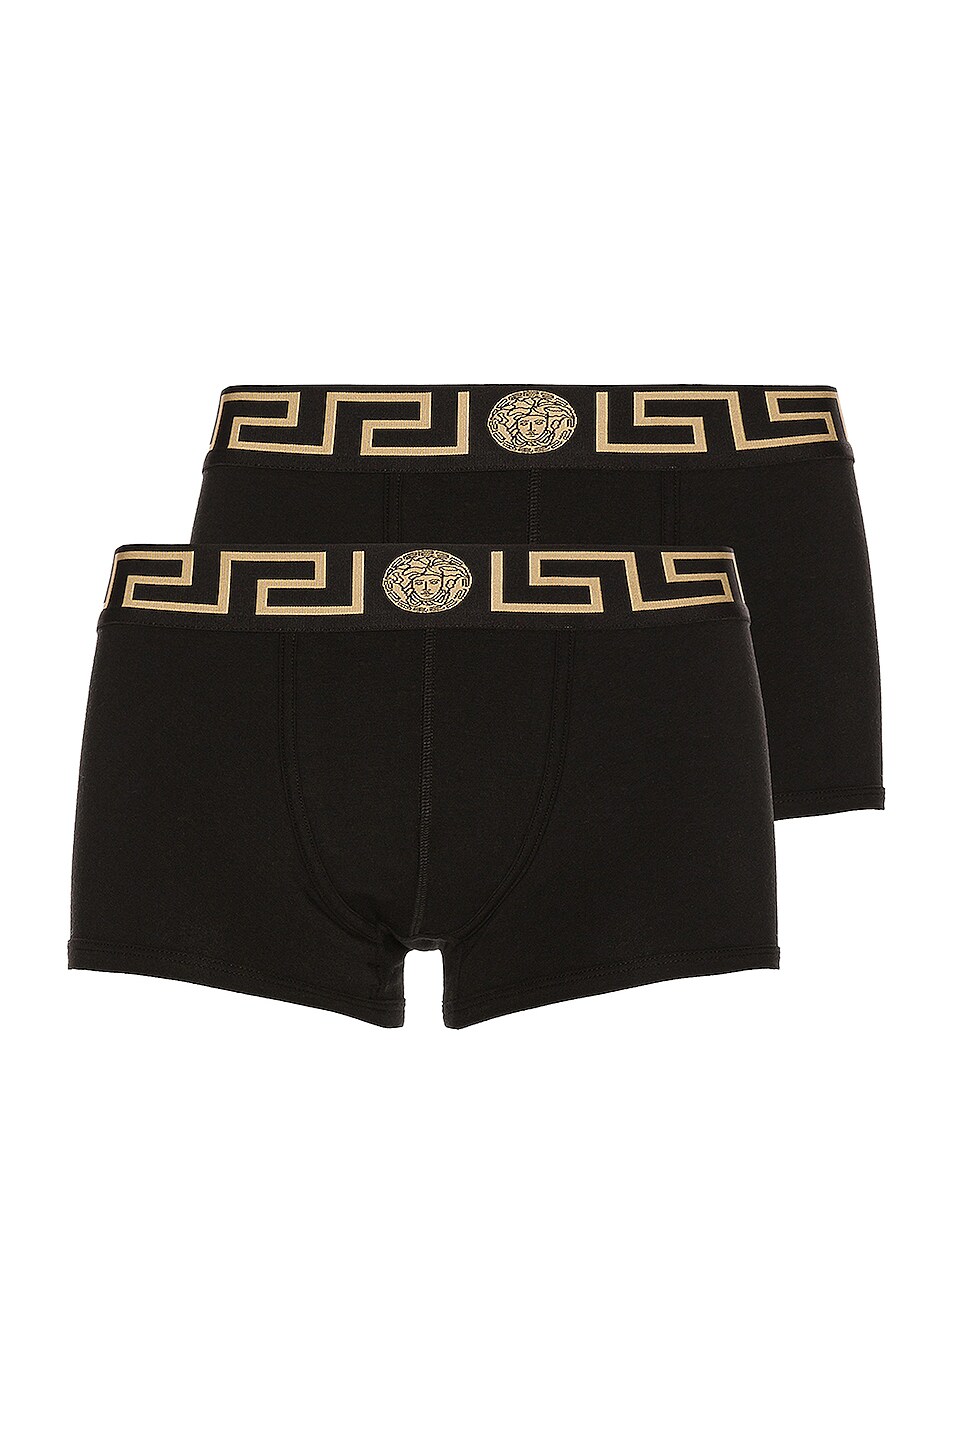 Image 1 of VERSACE Cotton Boxer Brief Two Pack in Black & Gold